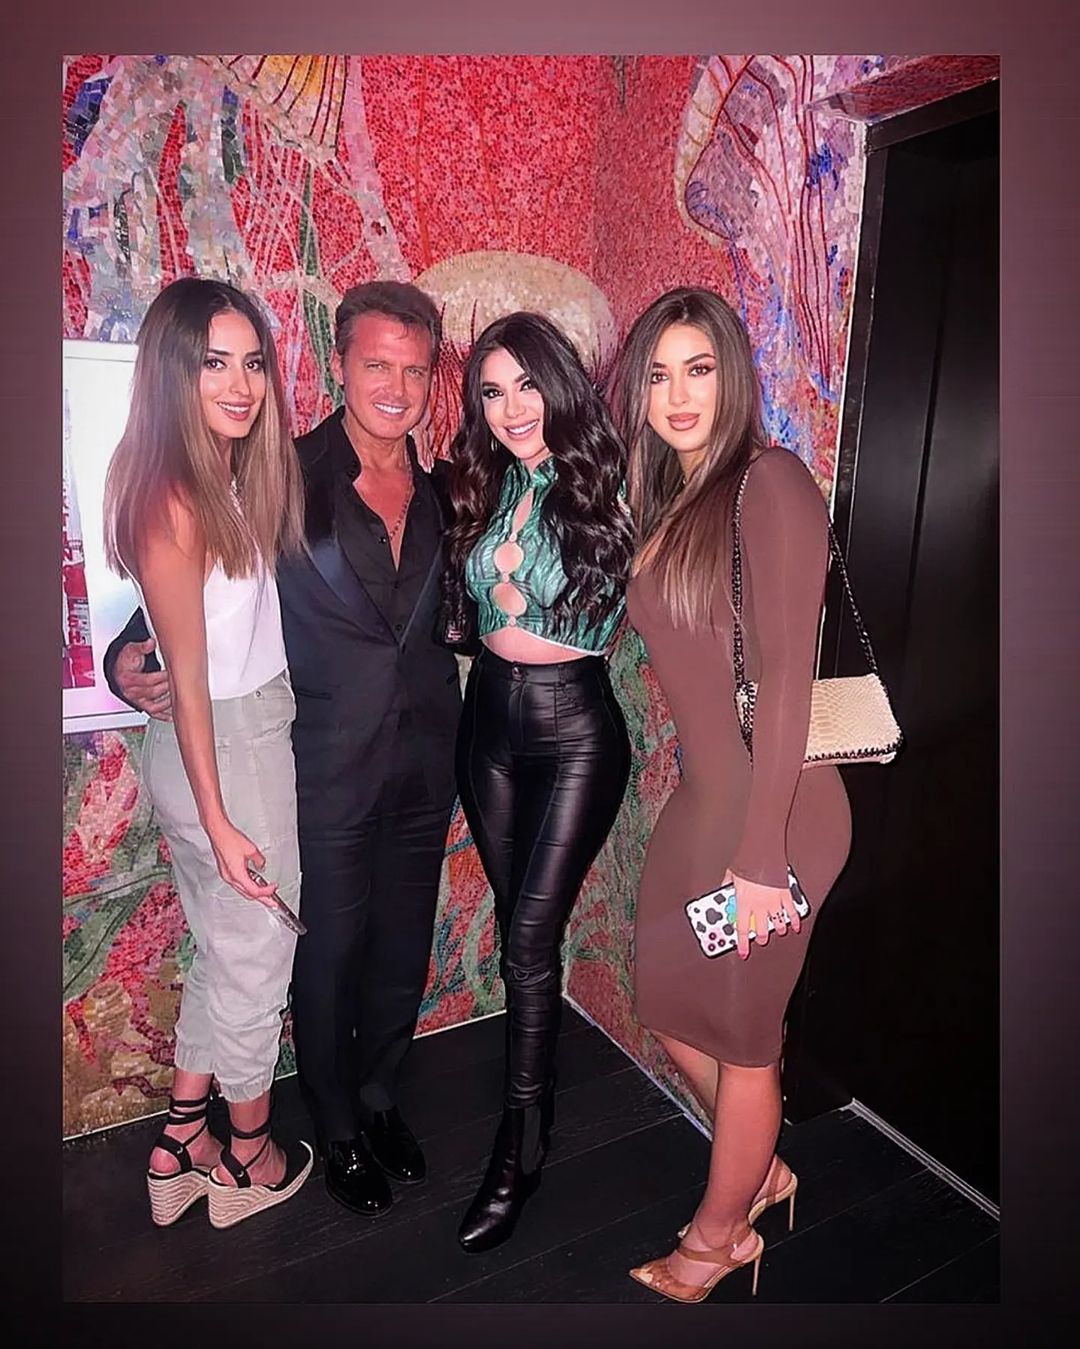 At the beginning of July, the artist was photographed in Miami in the company of beautiful women (Photo: Instagram @entrefamososmx)